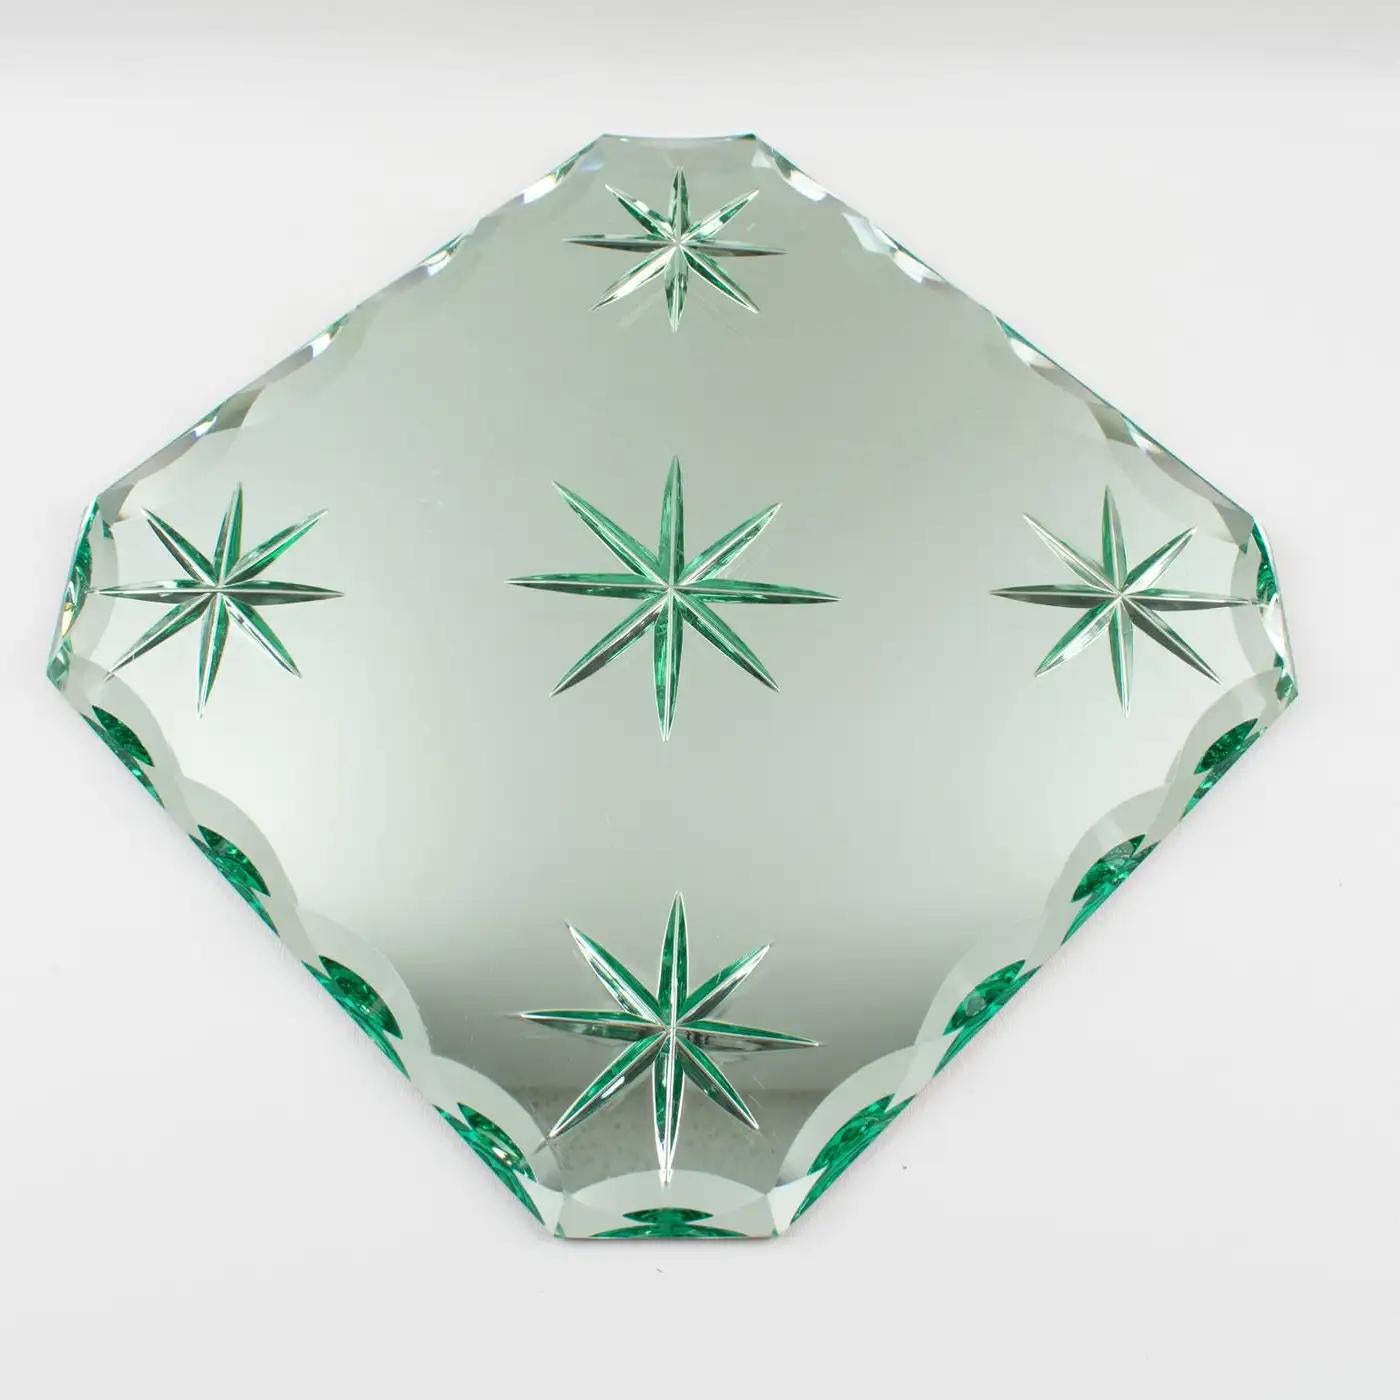 French Jean Luce Art Deco Mirrored Glass Tray, Platter or Centerpiece, 1930s For Sale